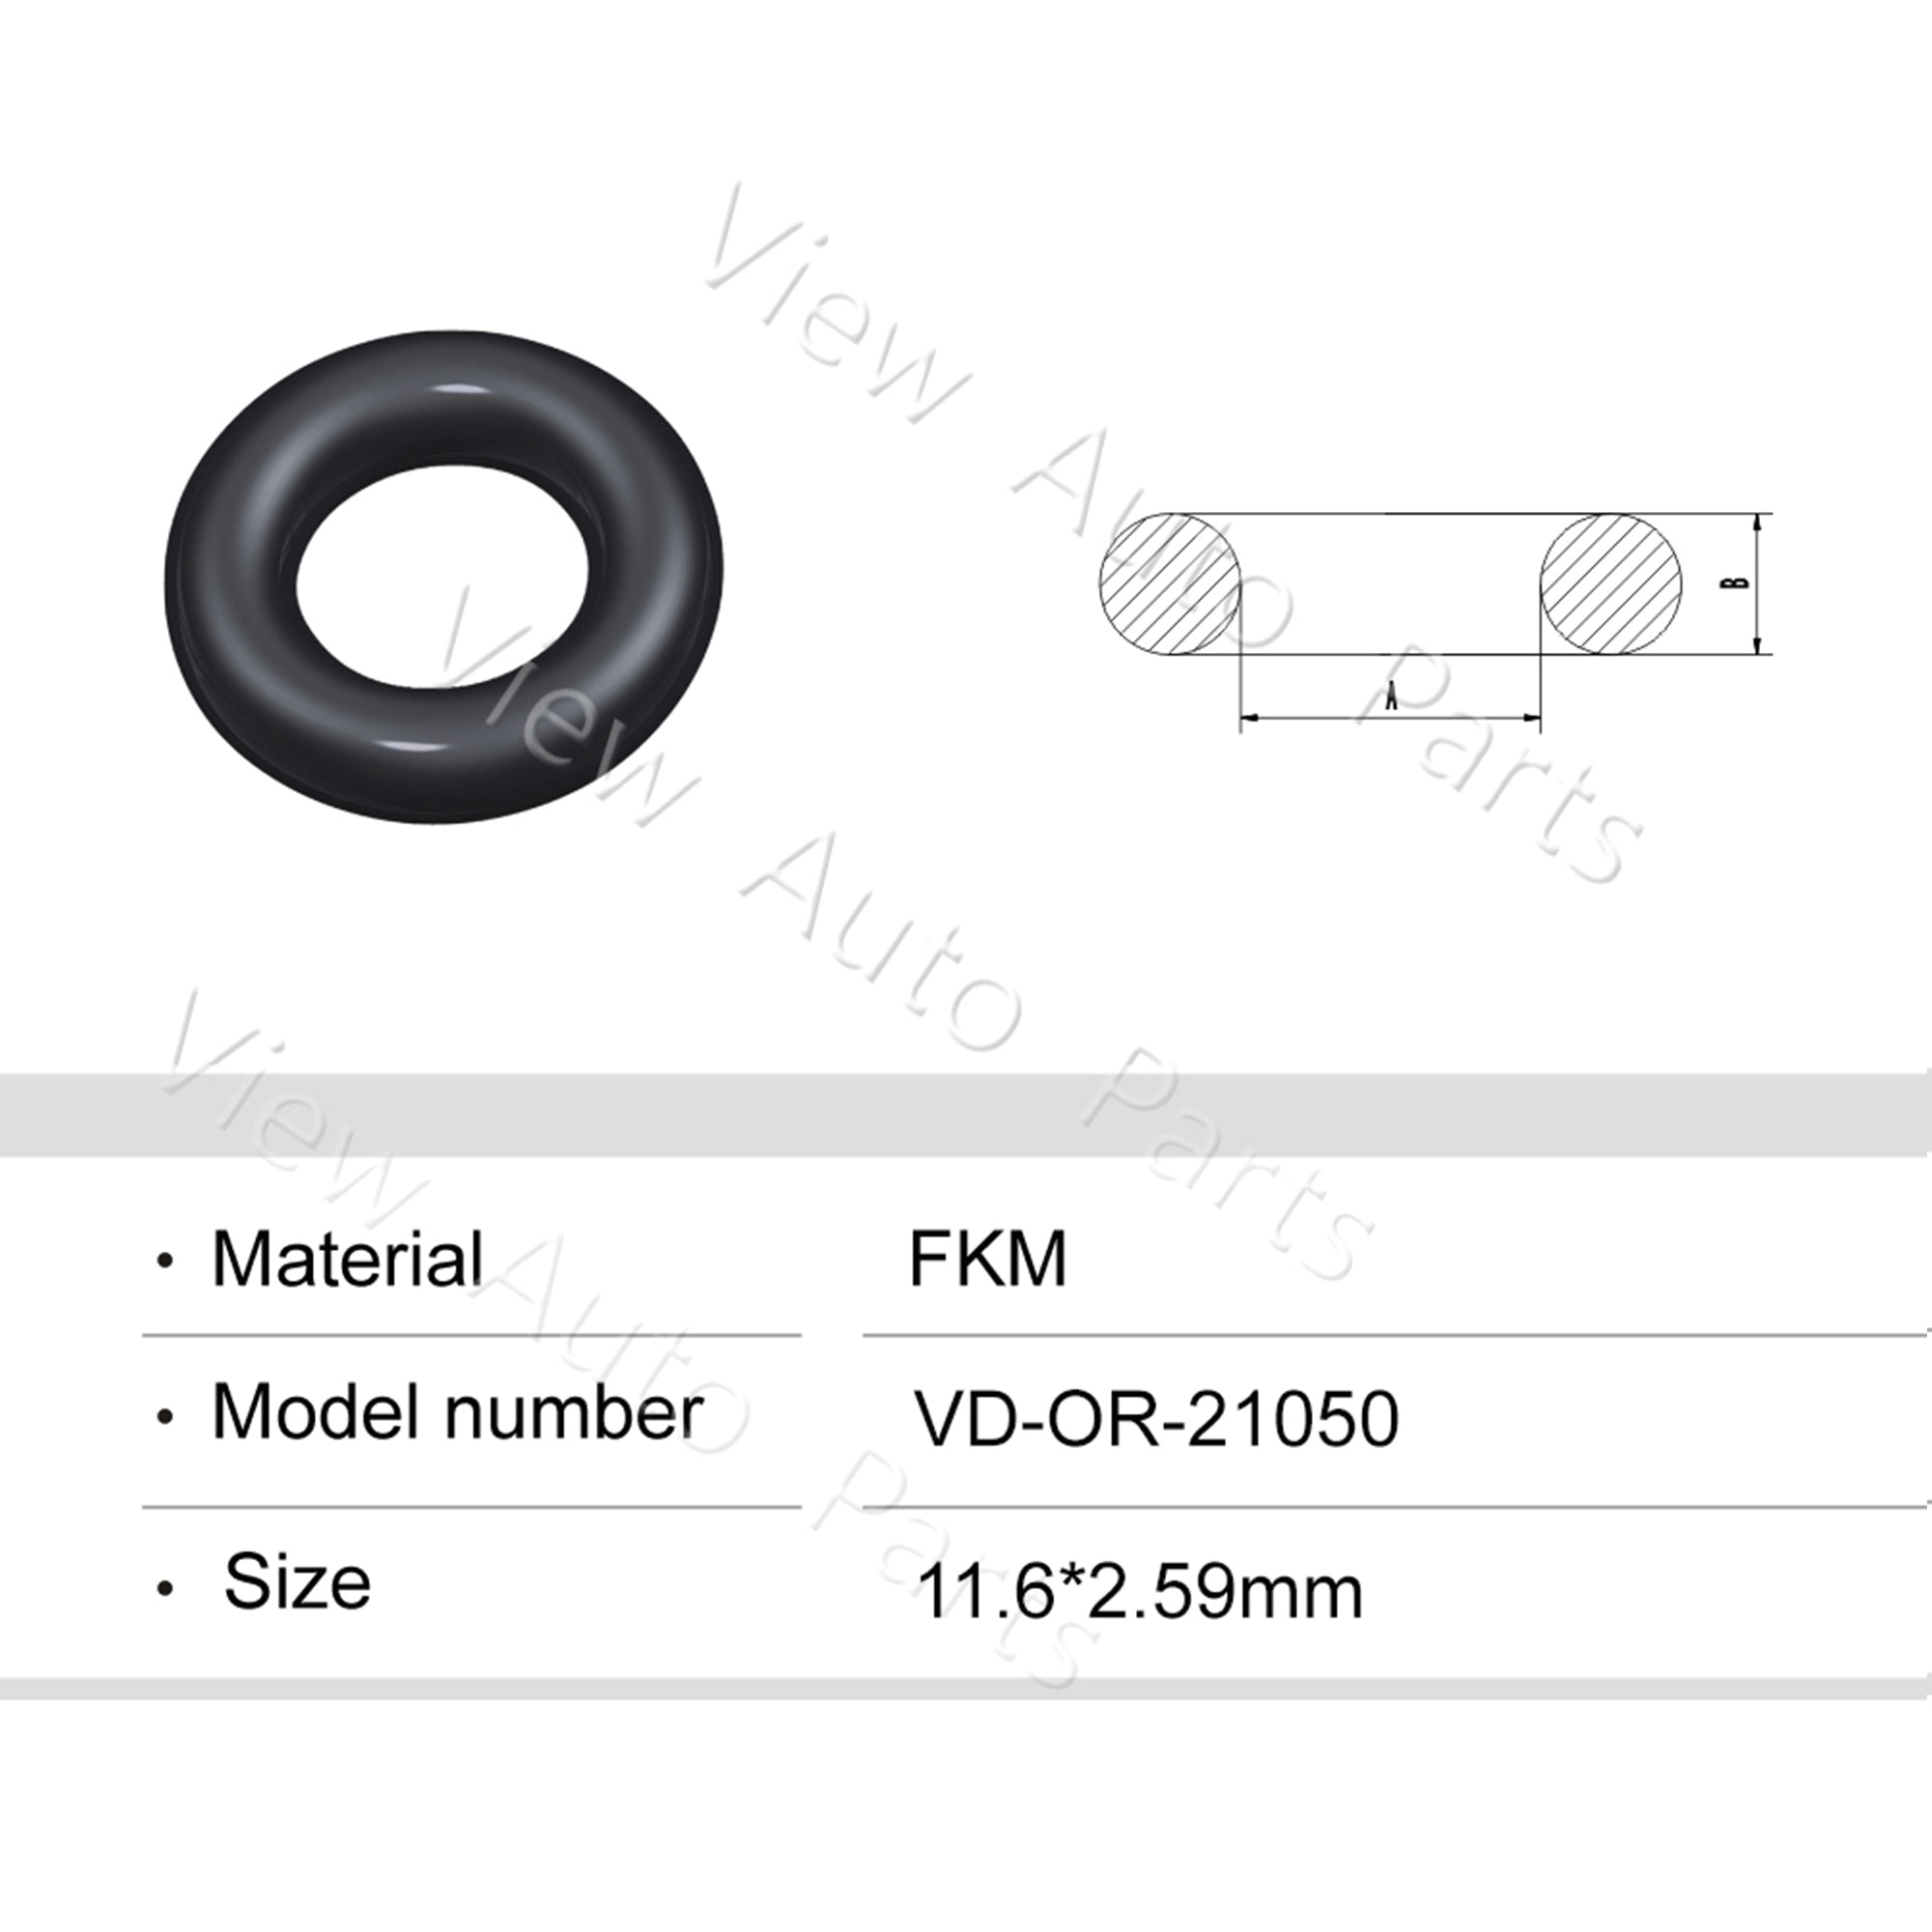 Fuel Injector Rubber Seal Orings for Wide range Fuel Injector Repair Kits FKM & Rubber Heat Resistant, Size: 11.6*2.59mm OR-21050